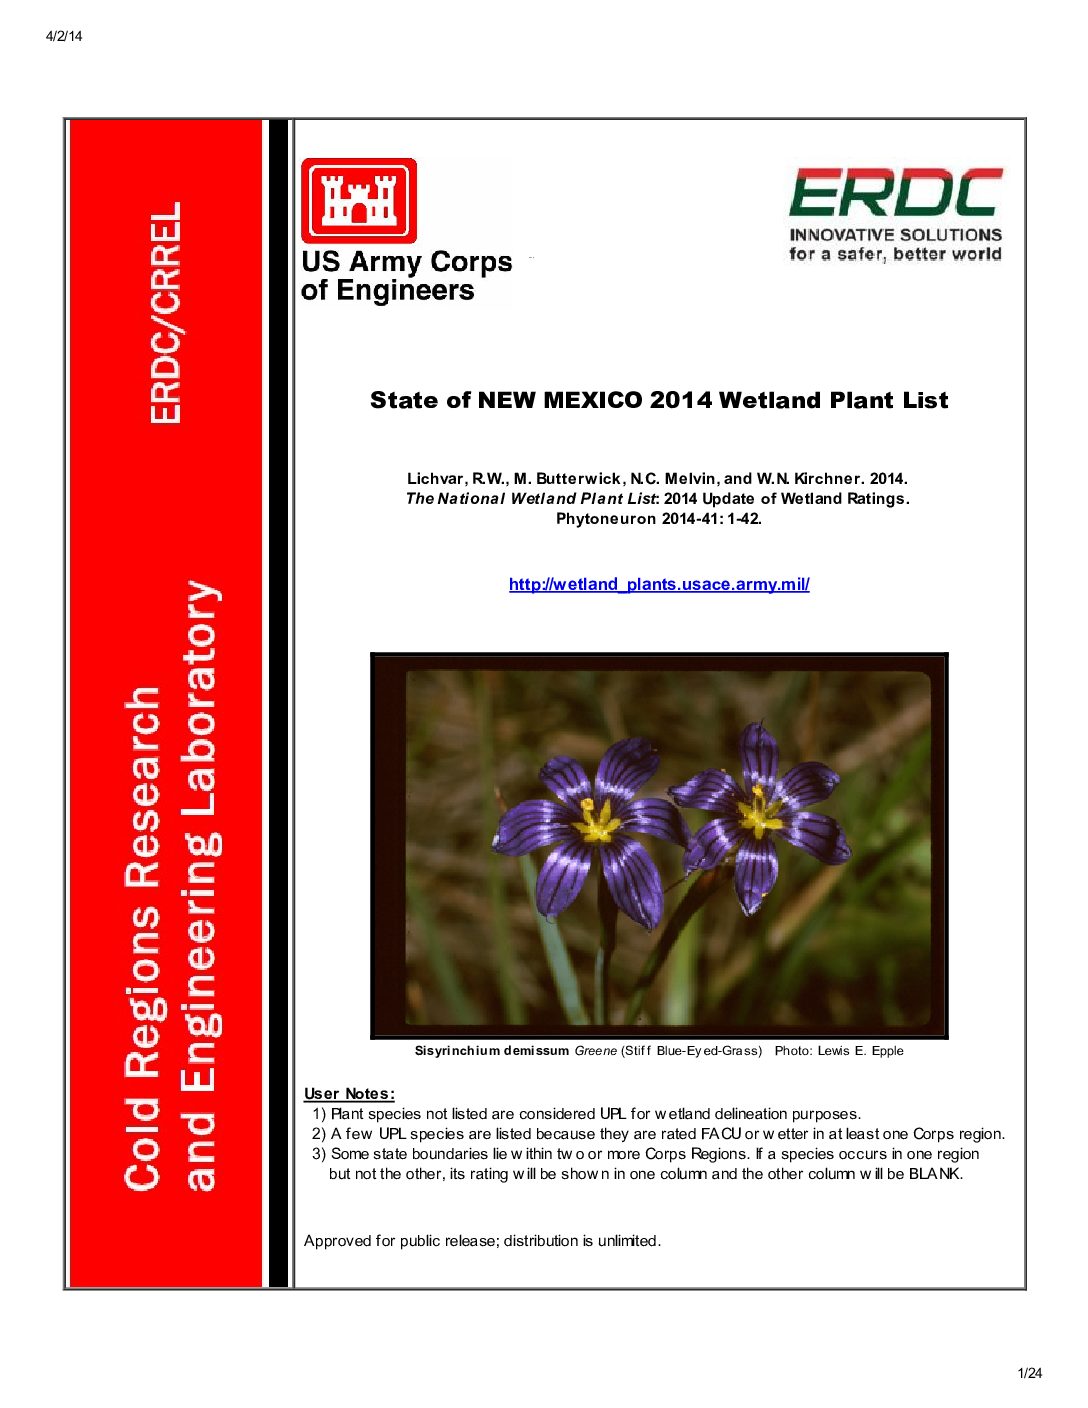 State of NEW MEXICO 2014 Wetland Plant List